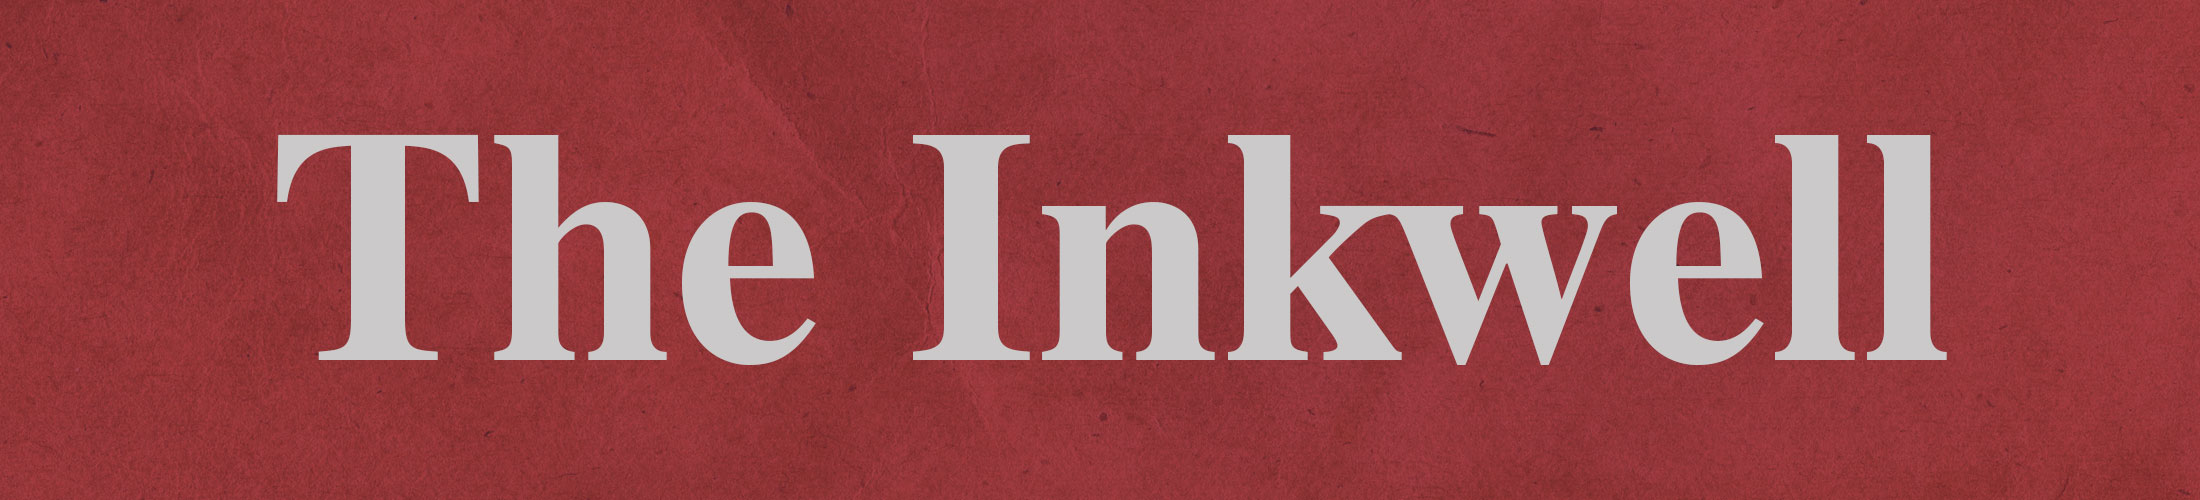 The Inkwell Header